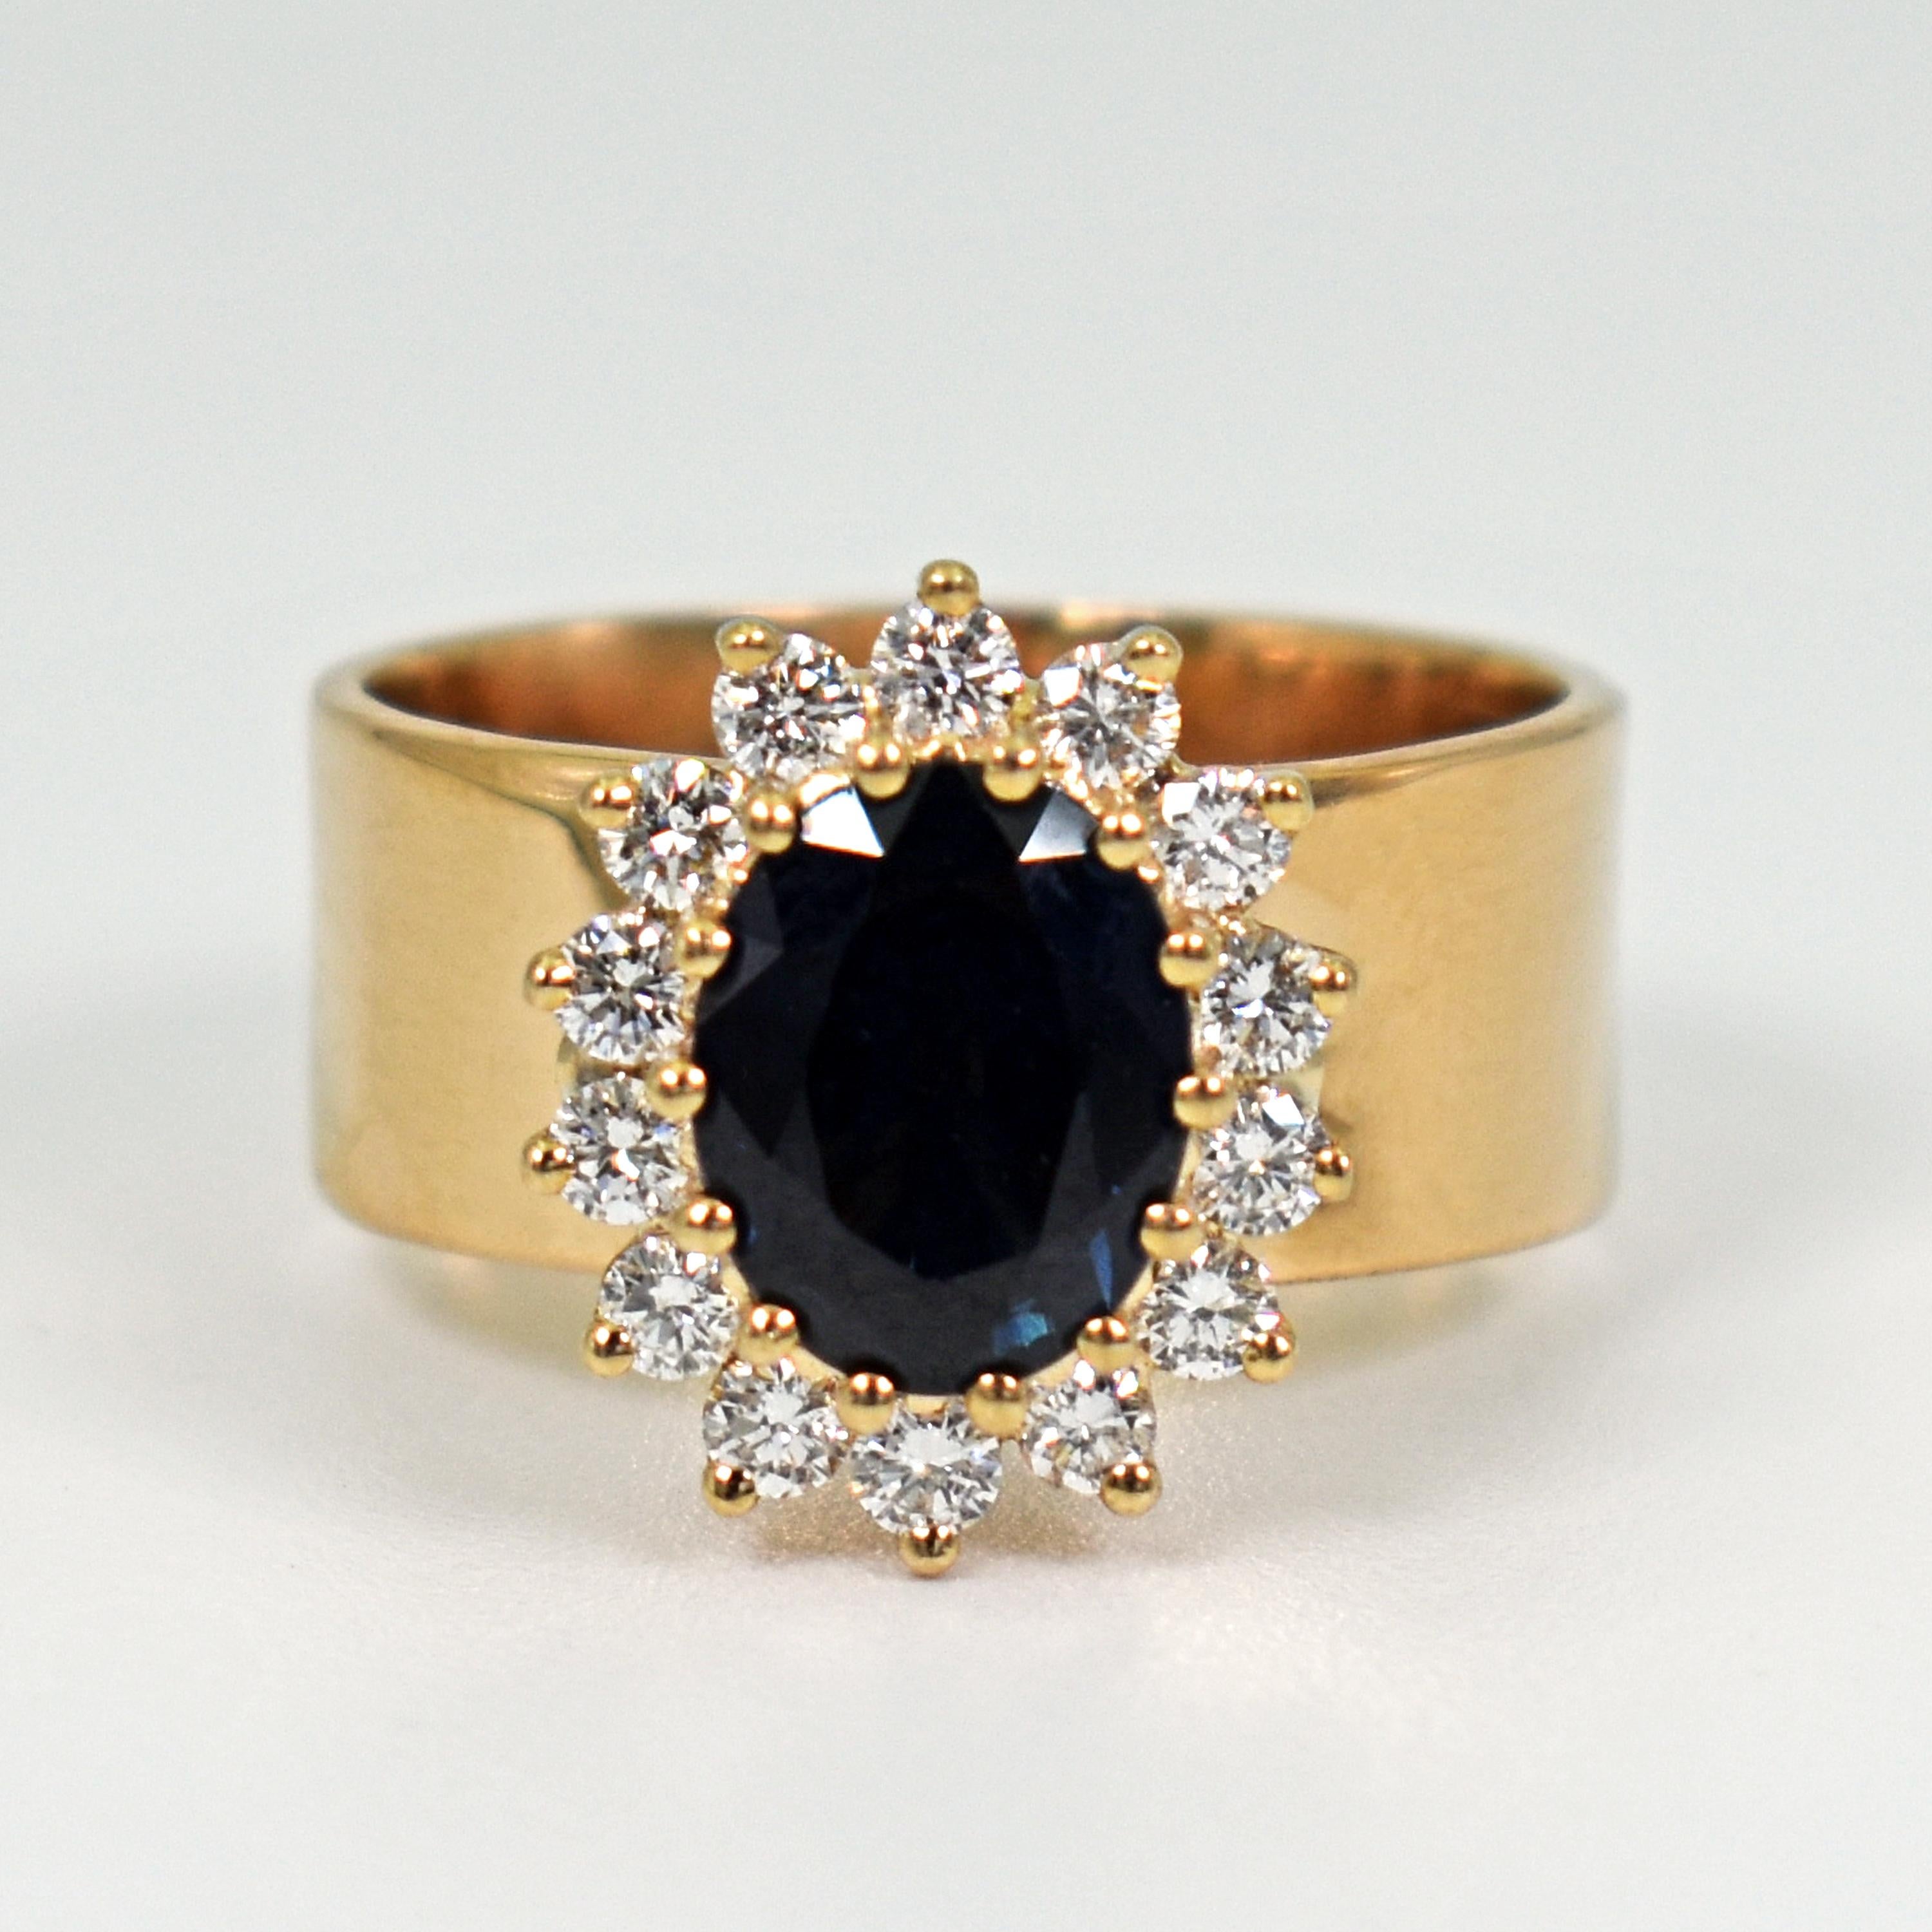 1.76 carat oval Blue Sapphire and white Diamond halo (0.42 cttw, G-H, SI1) in 14k yellow gold prong setting on an 18k yellow gold ring band. Ring is currently size US 6.5 and can be resized. Ring band is 7mm wide. Timeless meets contemporary in this